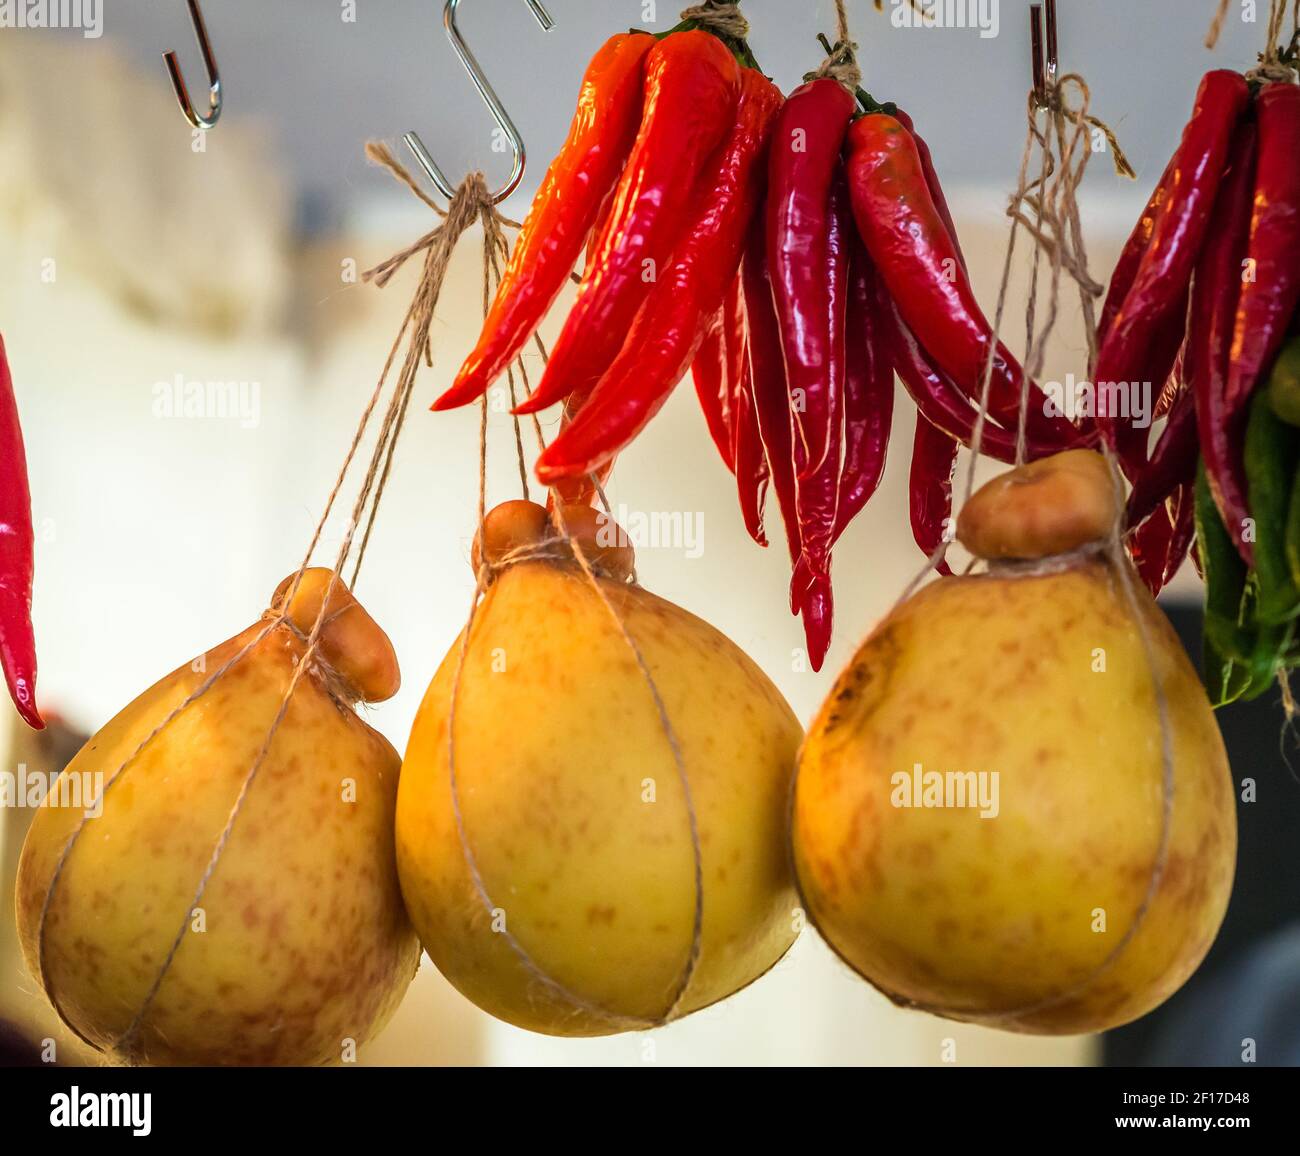 Fruits and chili pepper Stock Photo